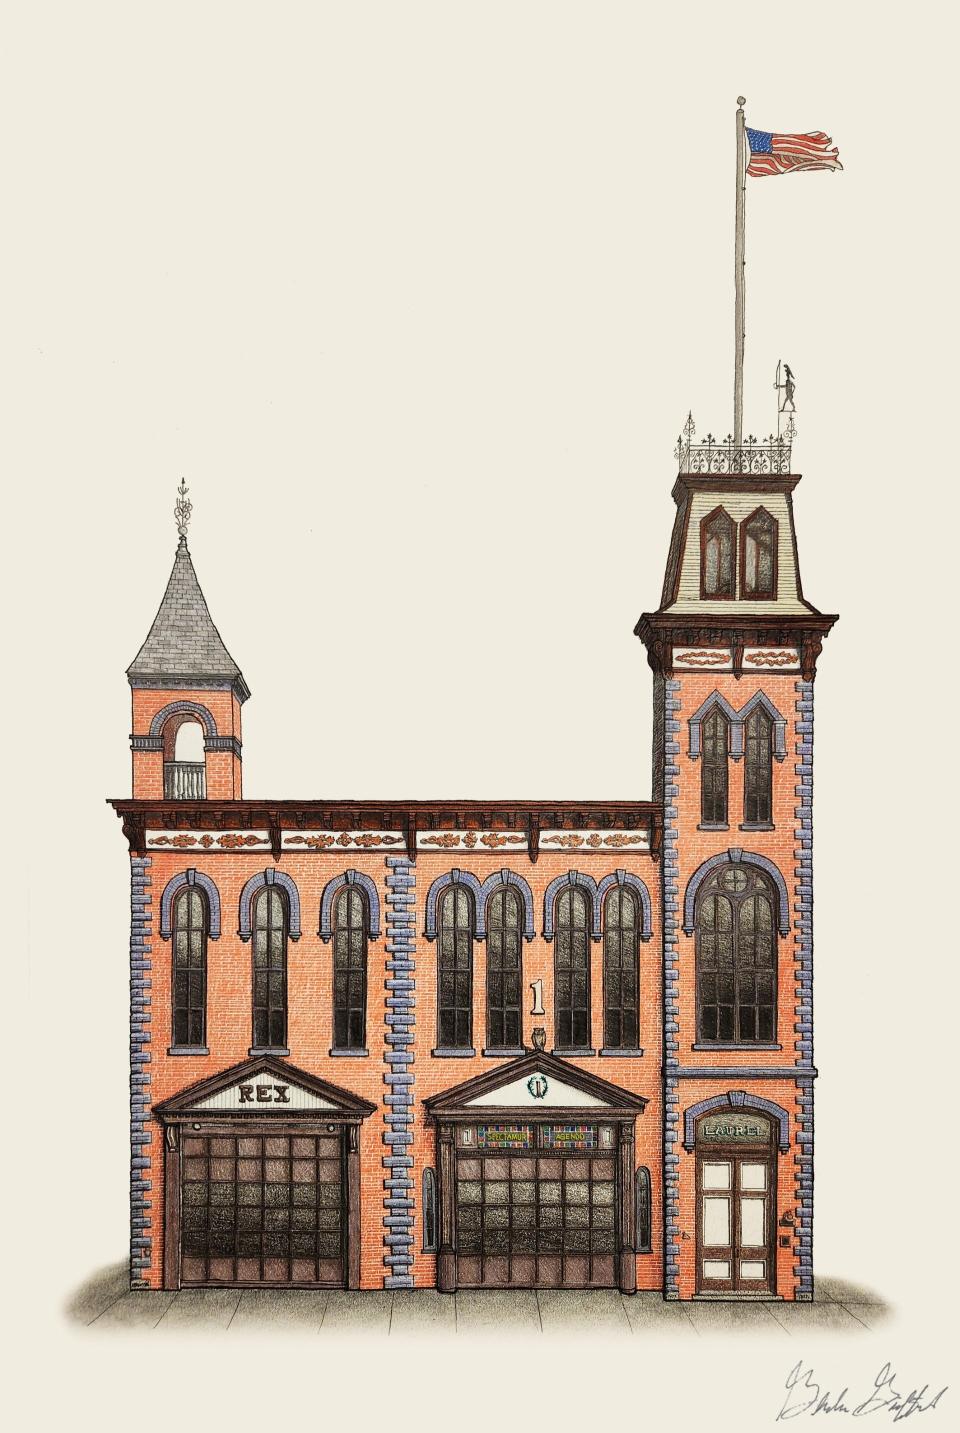 Architect/artist Blake Gifford has embarked on a series of hand-drawn landmark buildings in York. They can be found on Facebook, Instagram and his website, yorkarchillustrated.com. Here is his rendition of the Laurel-Rex Fire Station, built in 1877 and still in use.